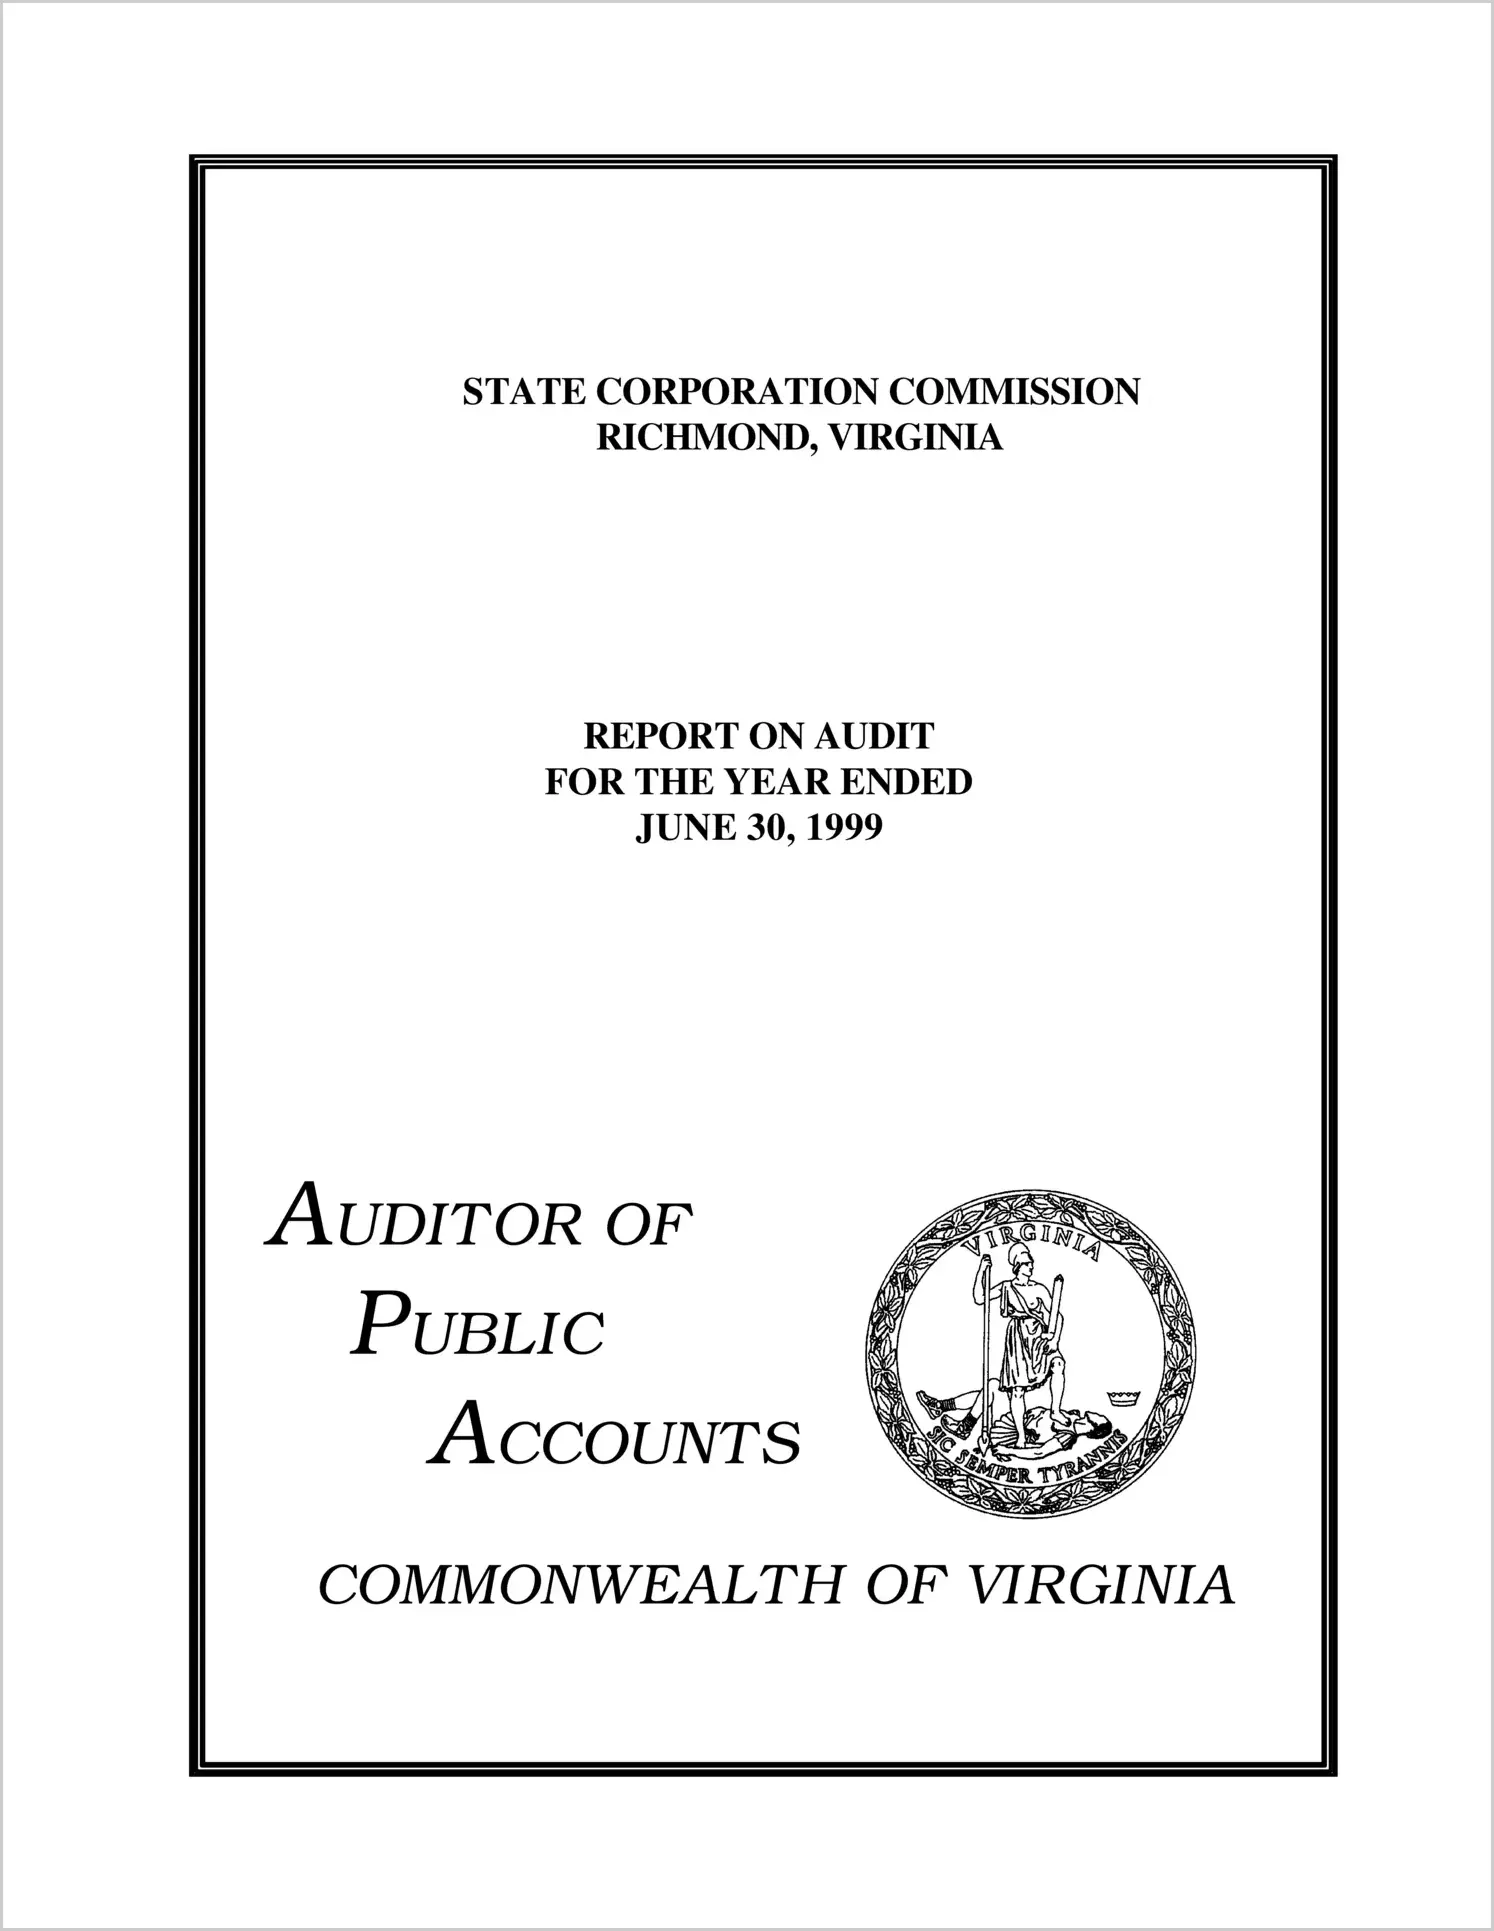 State Corporation Commission for the year ended June 30, 1999